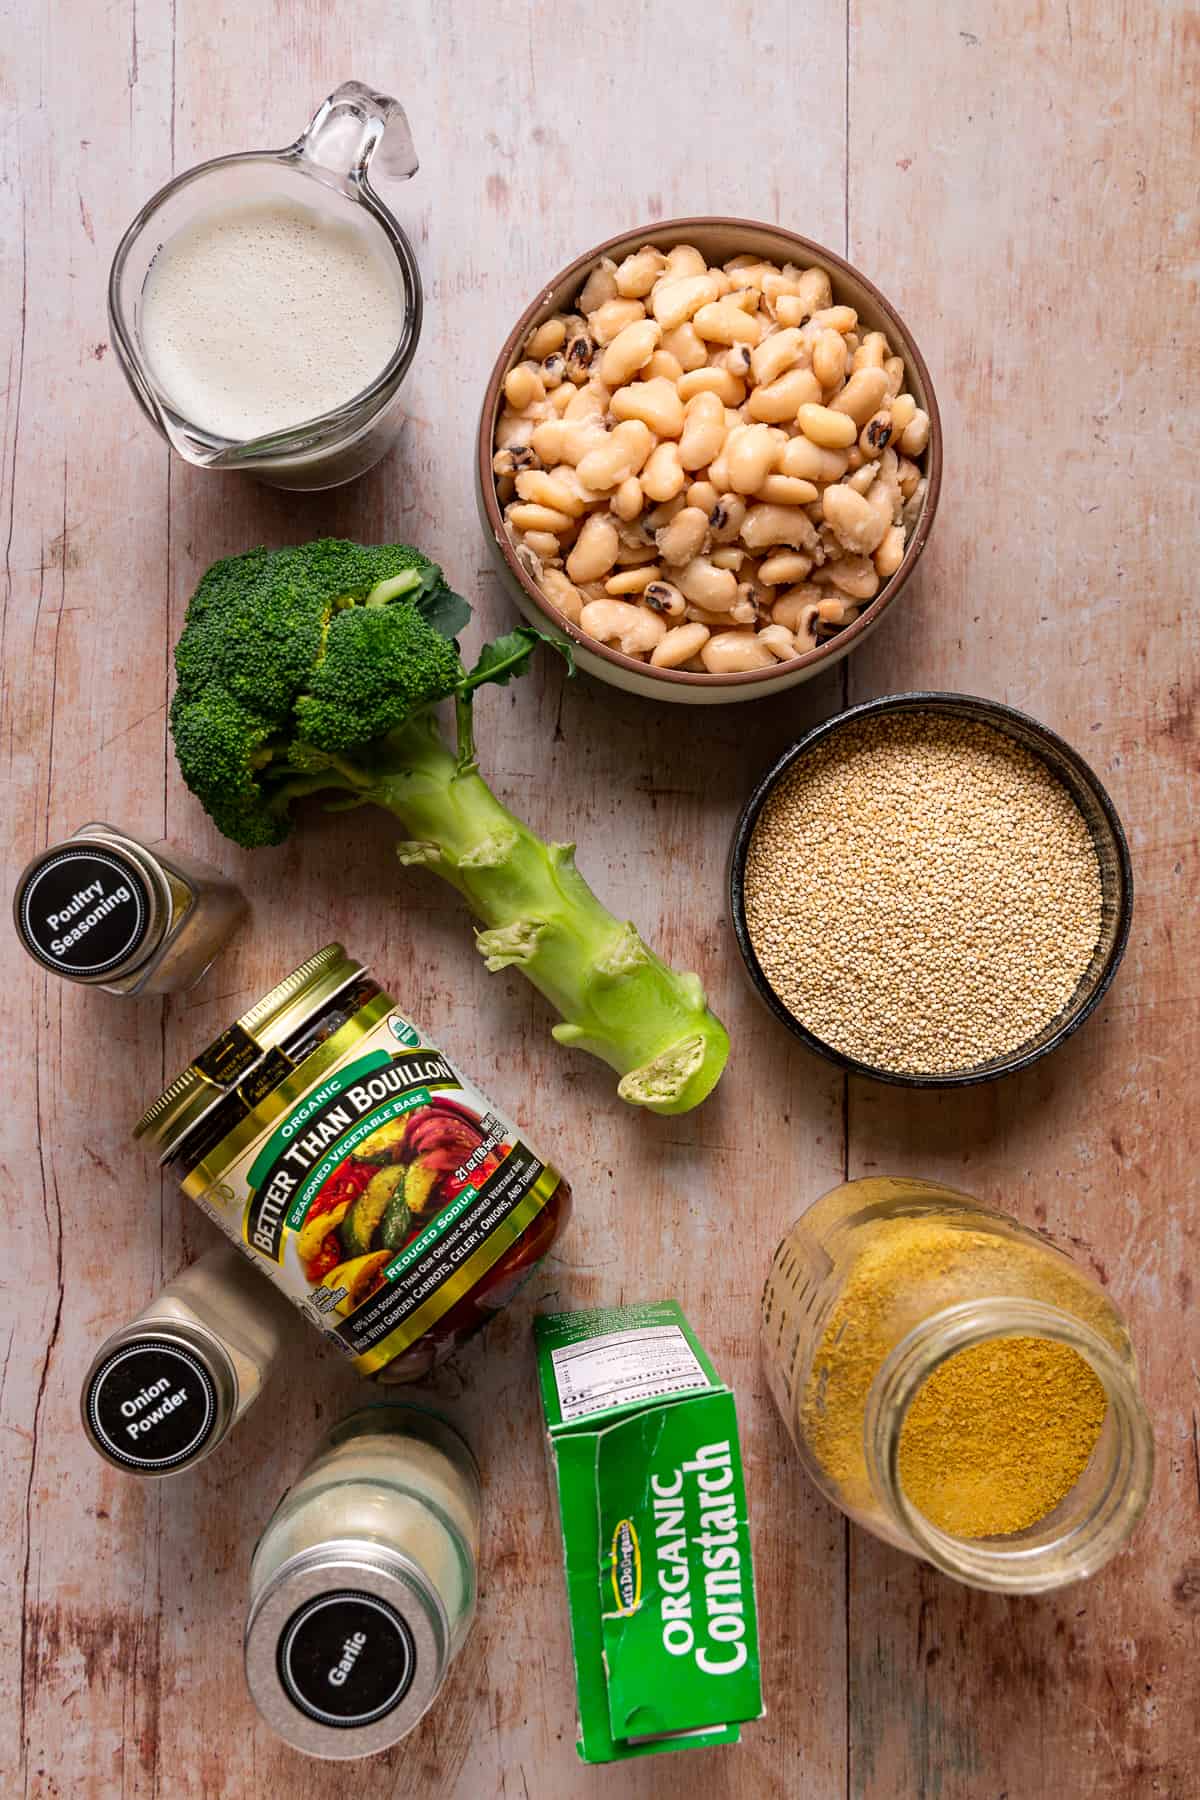 The 10 ingredients required to make easy vegan broccoli quinoa casserole with white beans.